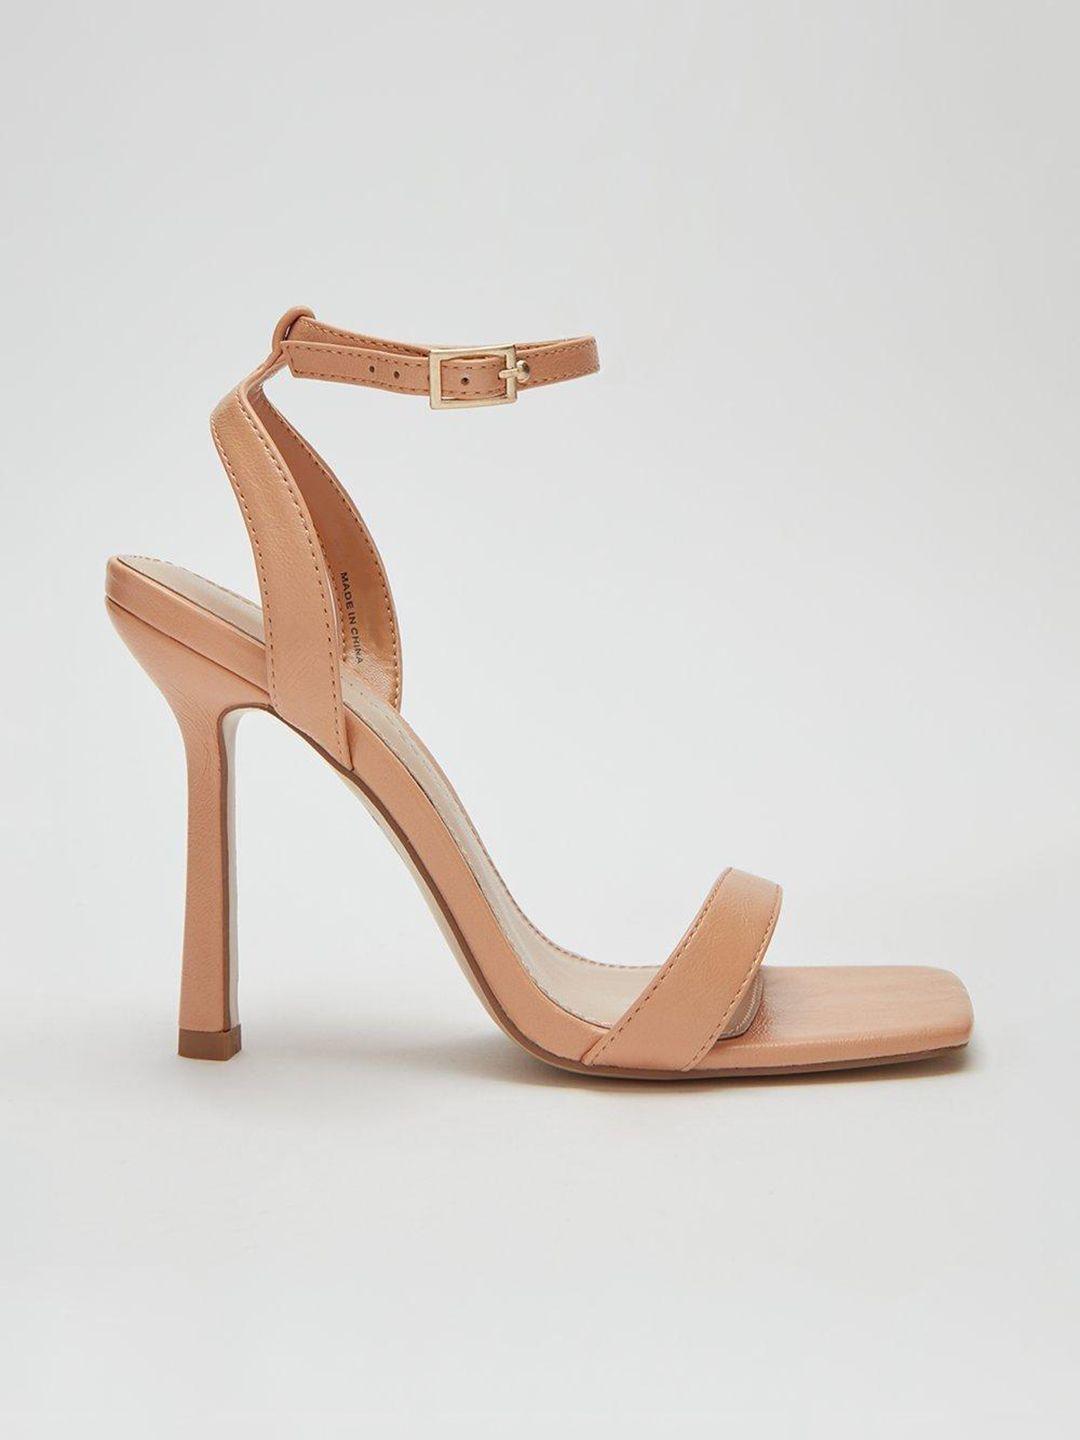 dorothy perkins nude-coloured stiletto sandals